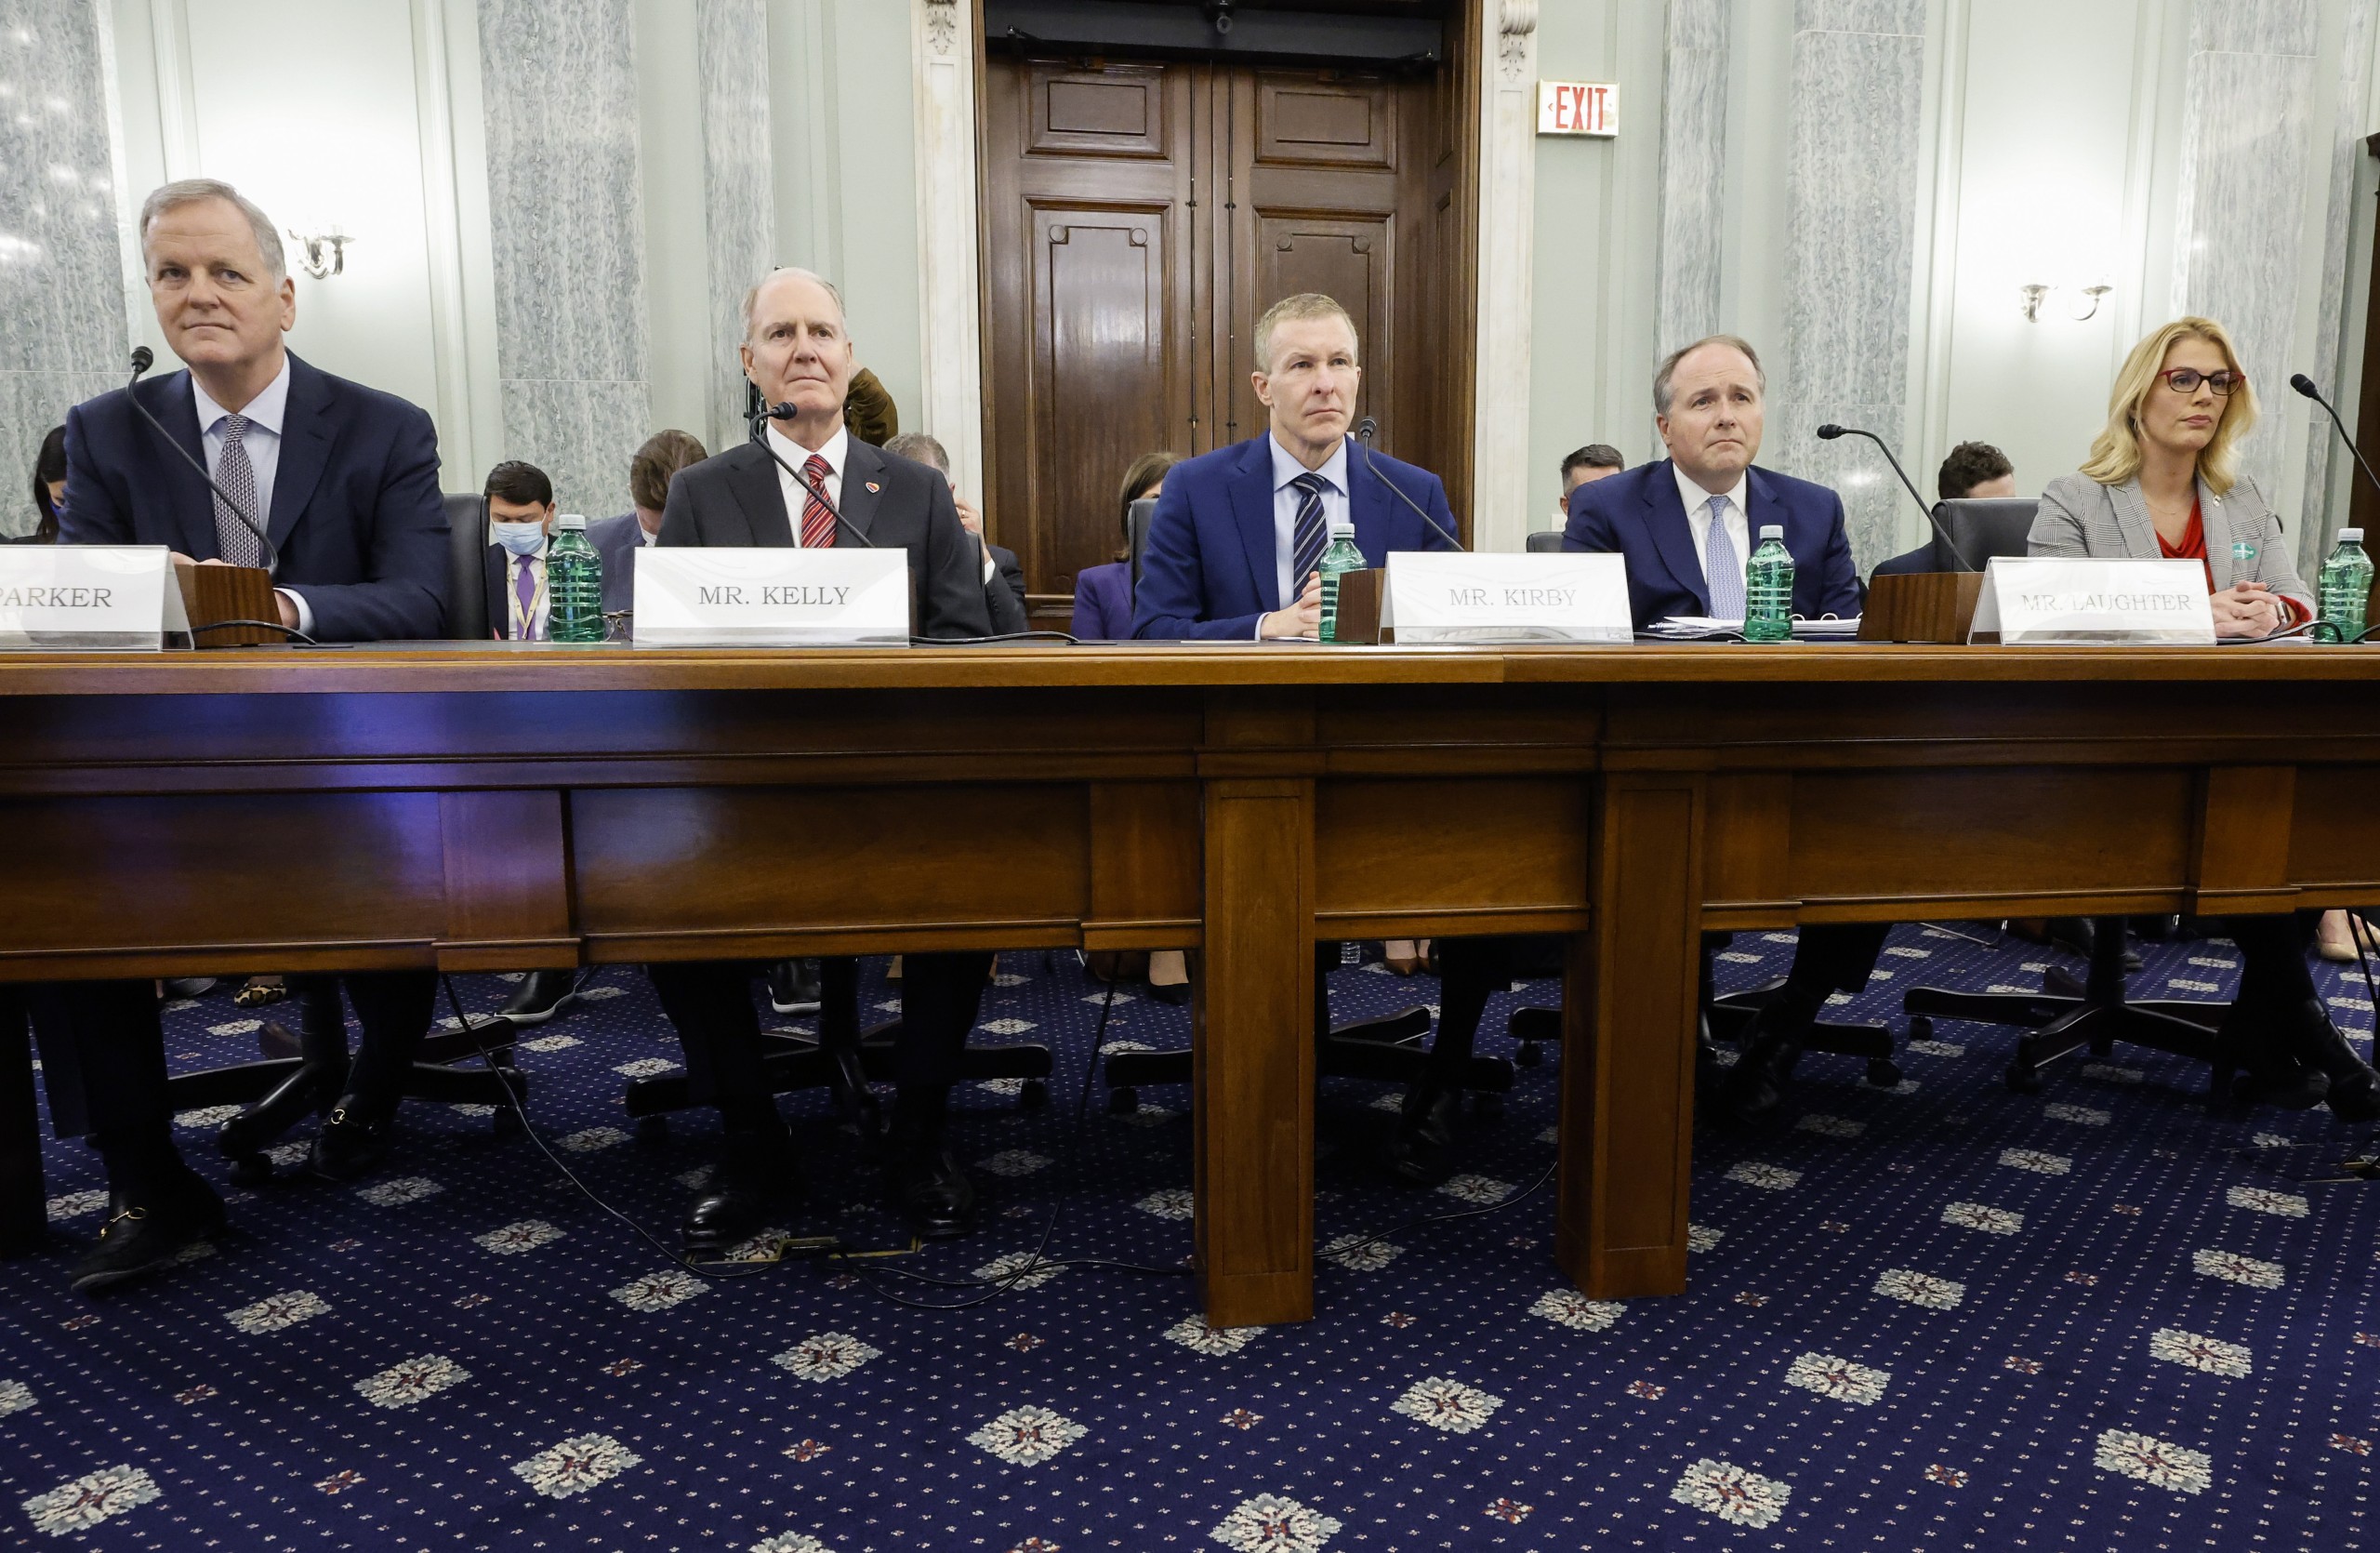 epa09644010  (L-R) American Airlines CEO Doug Parker, Southwest Airlines CEO Gary Kelly, United Airlines CEO Scott Kirby, Delta Air Lines Executive Vice President John Laughter and Association of Flight Attendants-CWA International President Sara Nelson testify before the Senate Commerce, Science, and Transportation in the Russell Senate Office Building on Capitol Hill in Washington, DC, USA, 15 December 2021. The air transportation executives testified about the current state of the US airline industry during the oversight hearing.  EPA/Chip Somodevilla / POOL